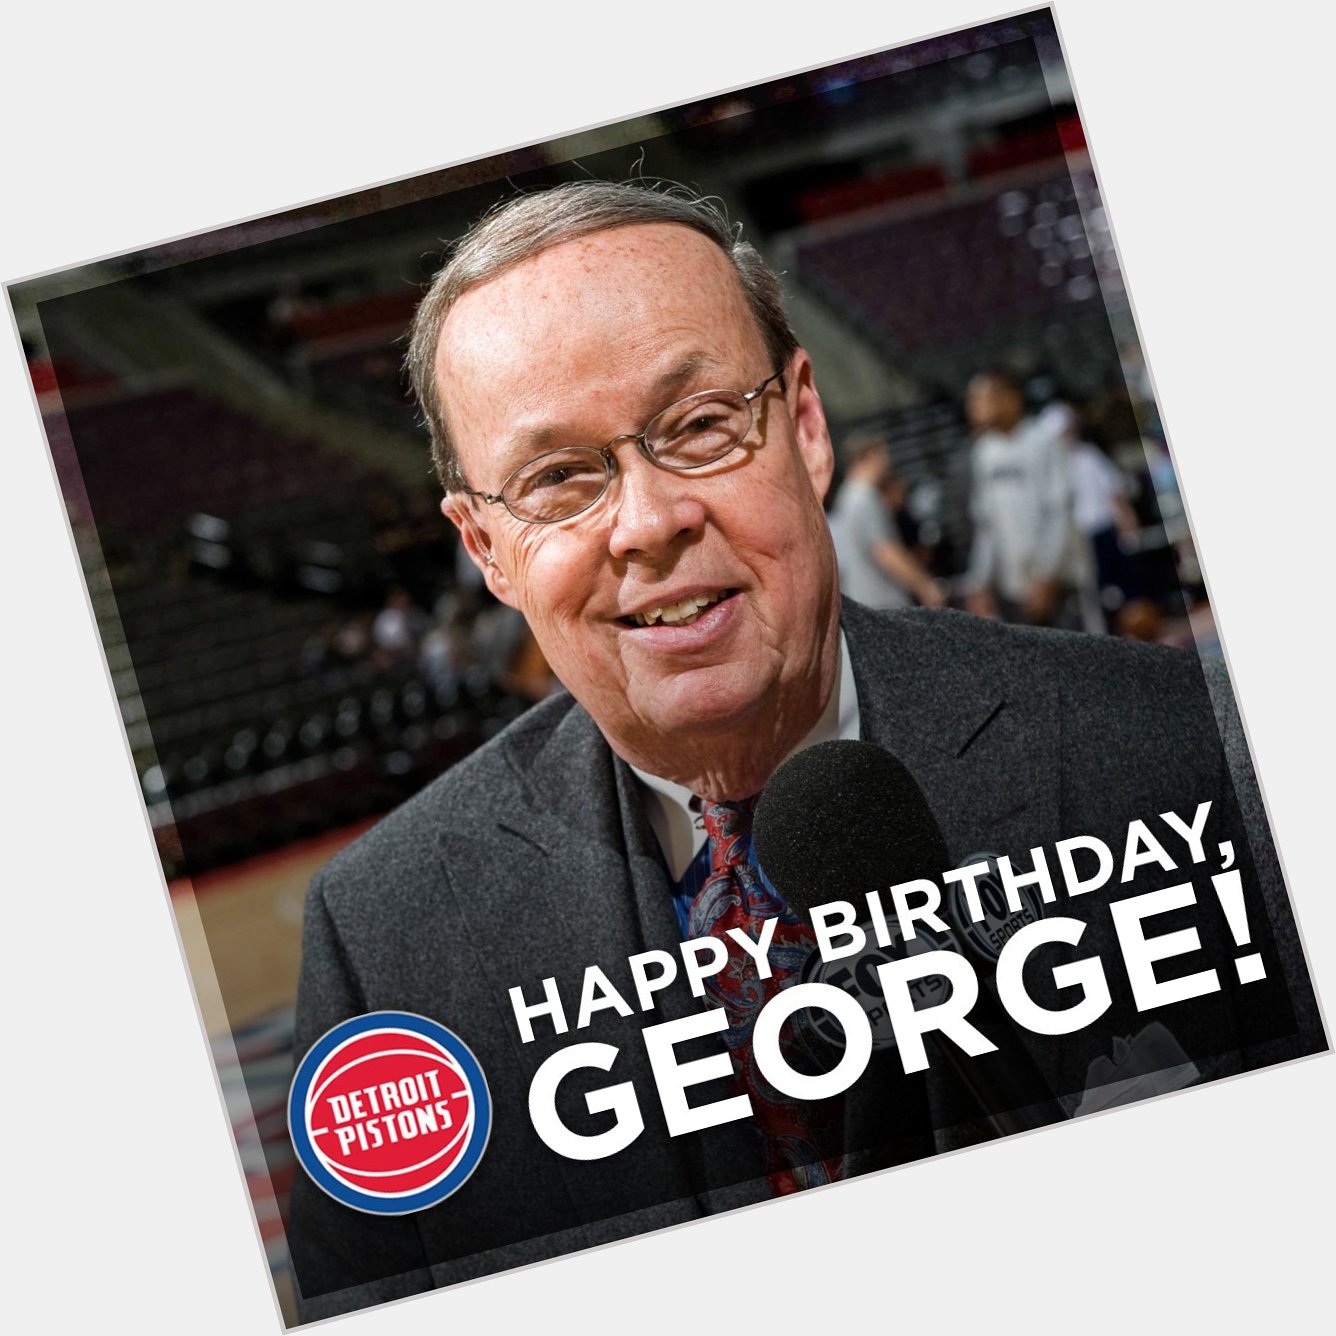 He\s a legend and he\s celebrating a birthday today.

Happy Birthday George Blaha! 